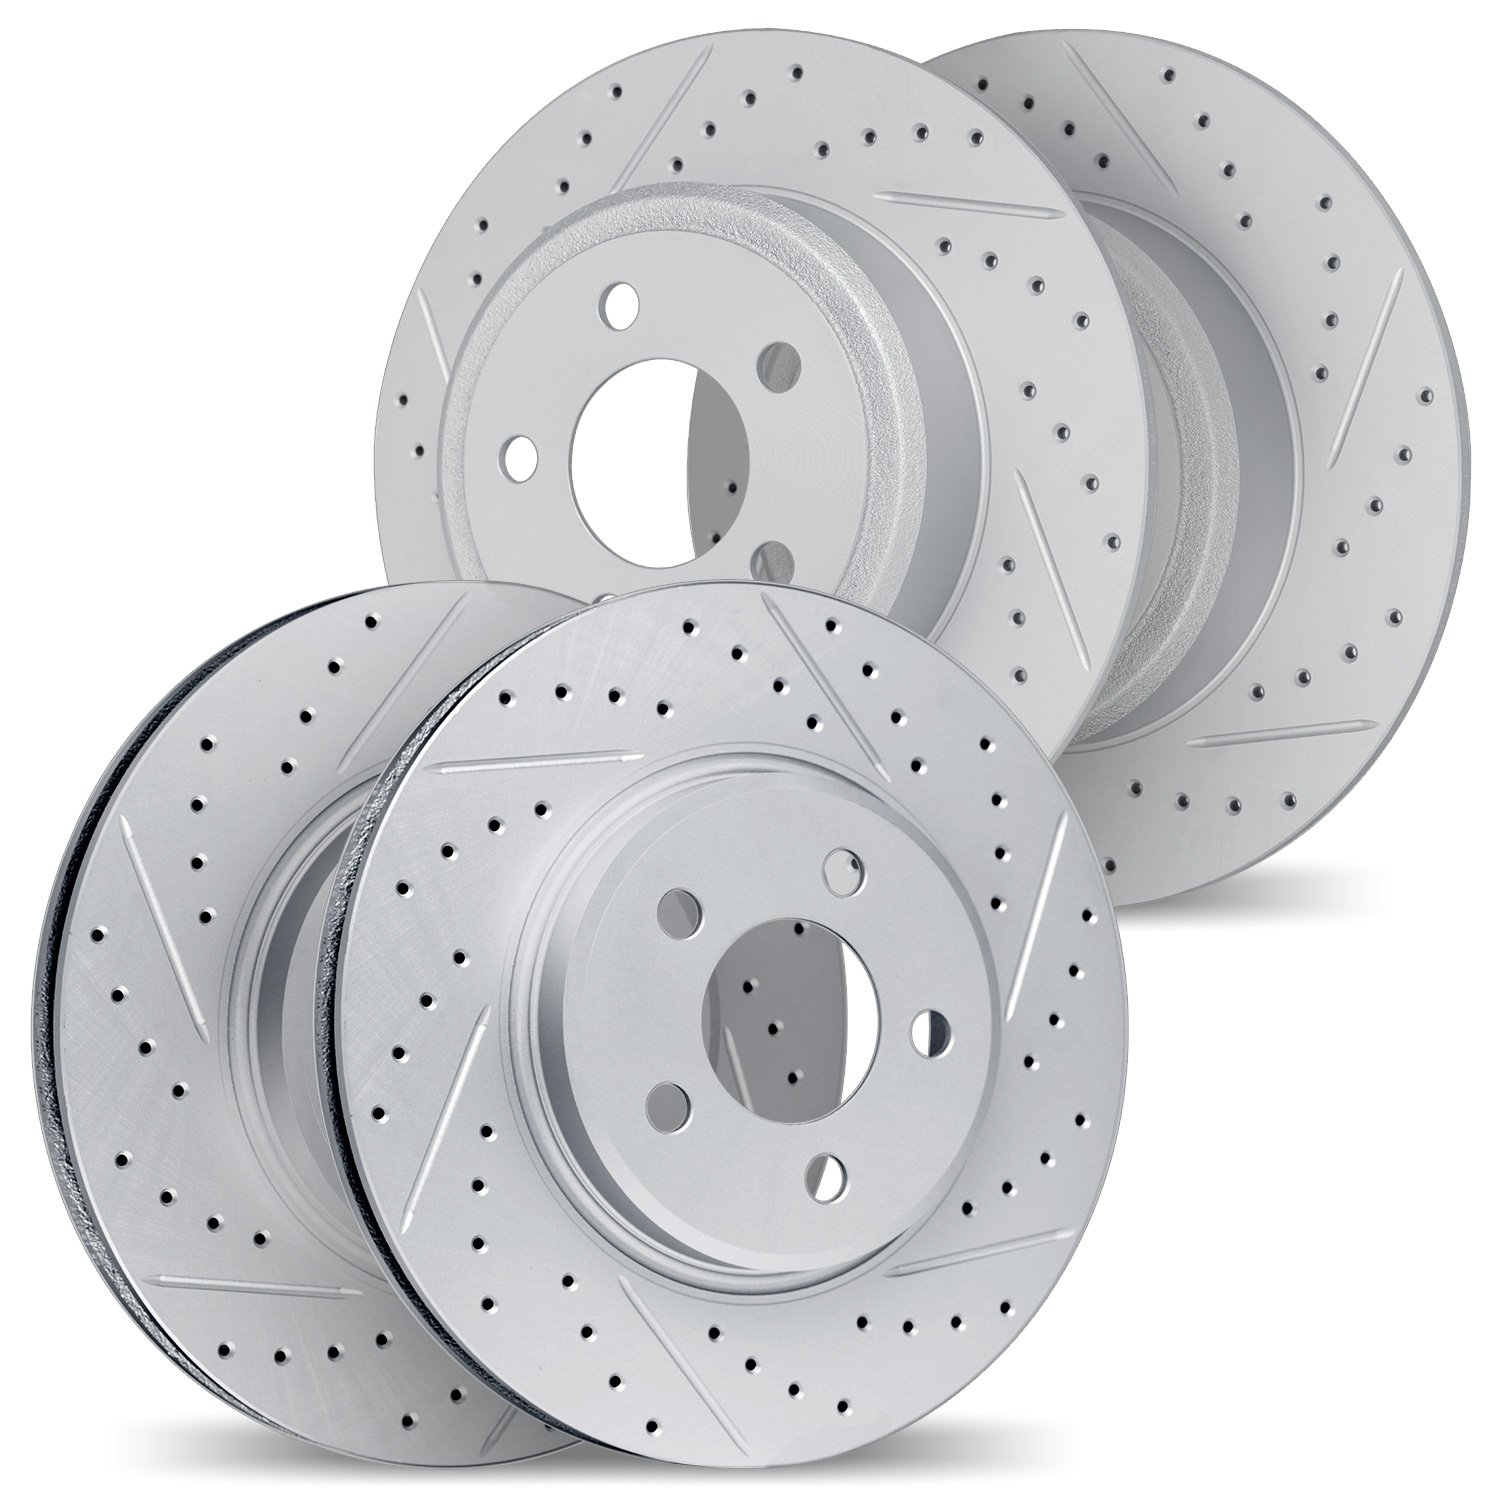 2004-63047 Geoperformance Drilled/Slotted Brake Rotors, 2006-2012 Mercedes-Benz, Position: Front and Rear